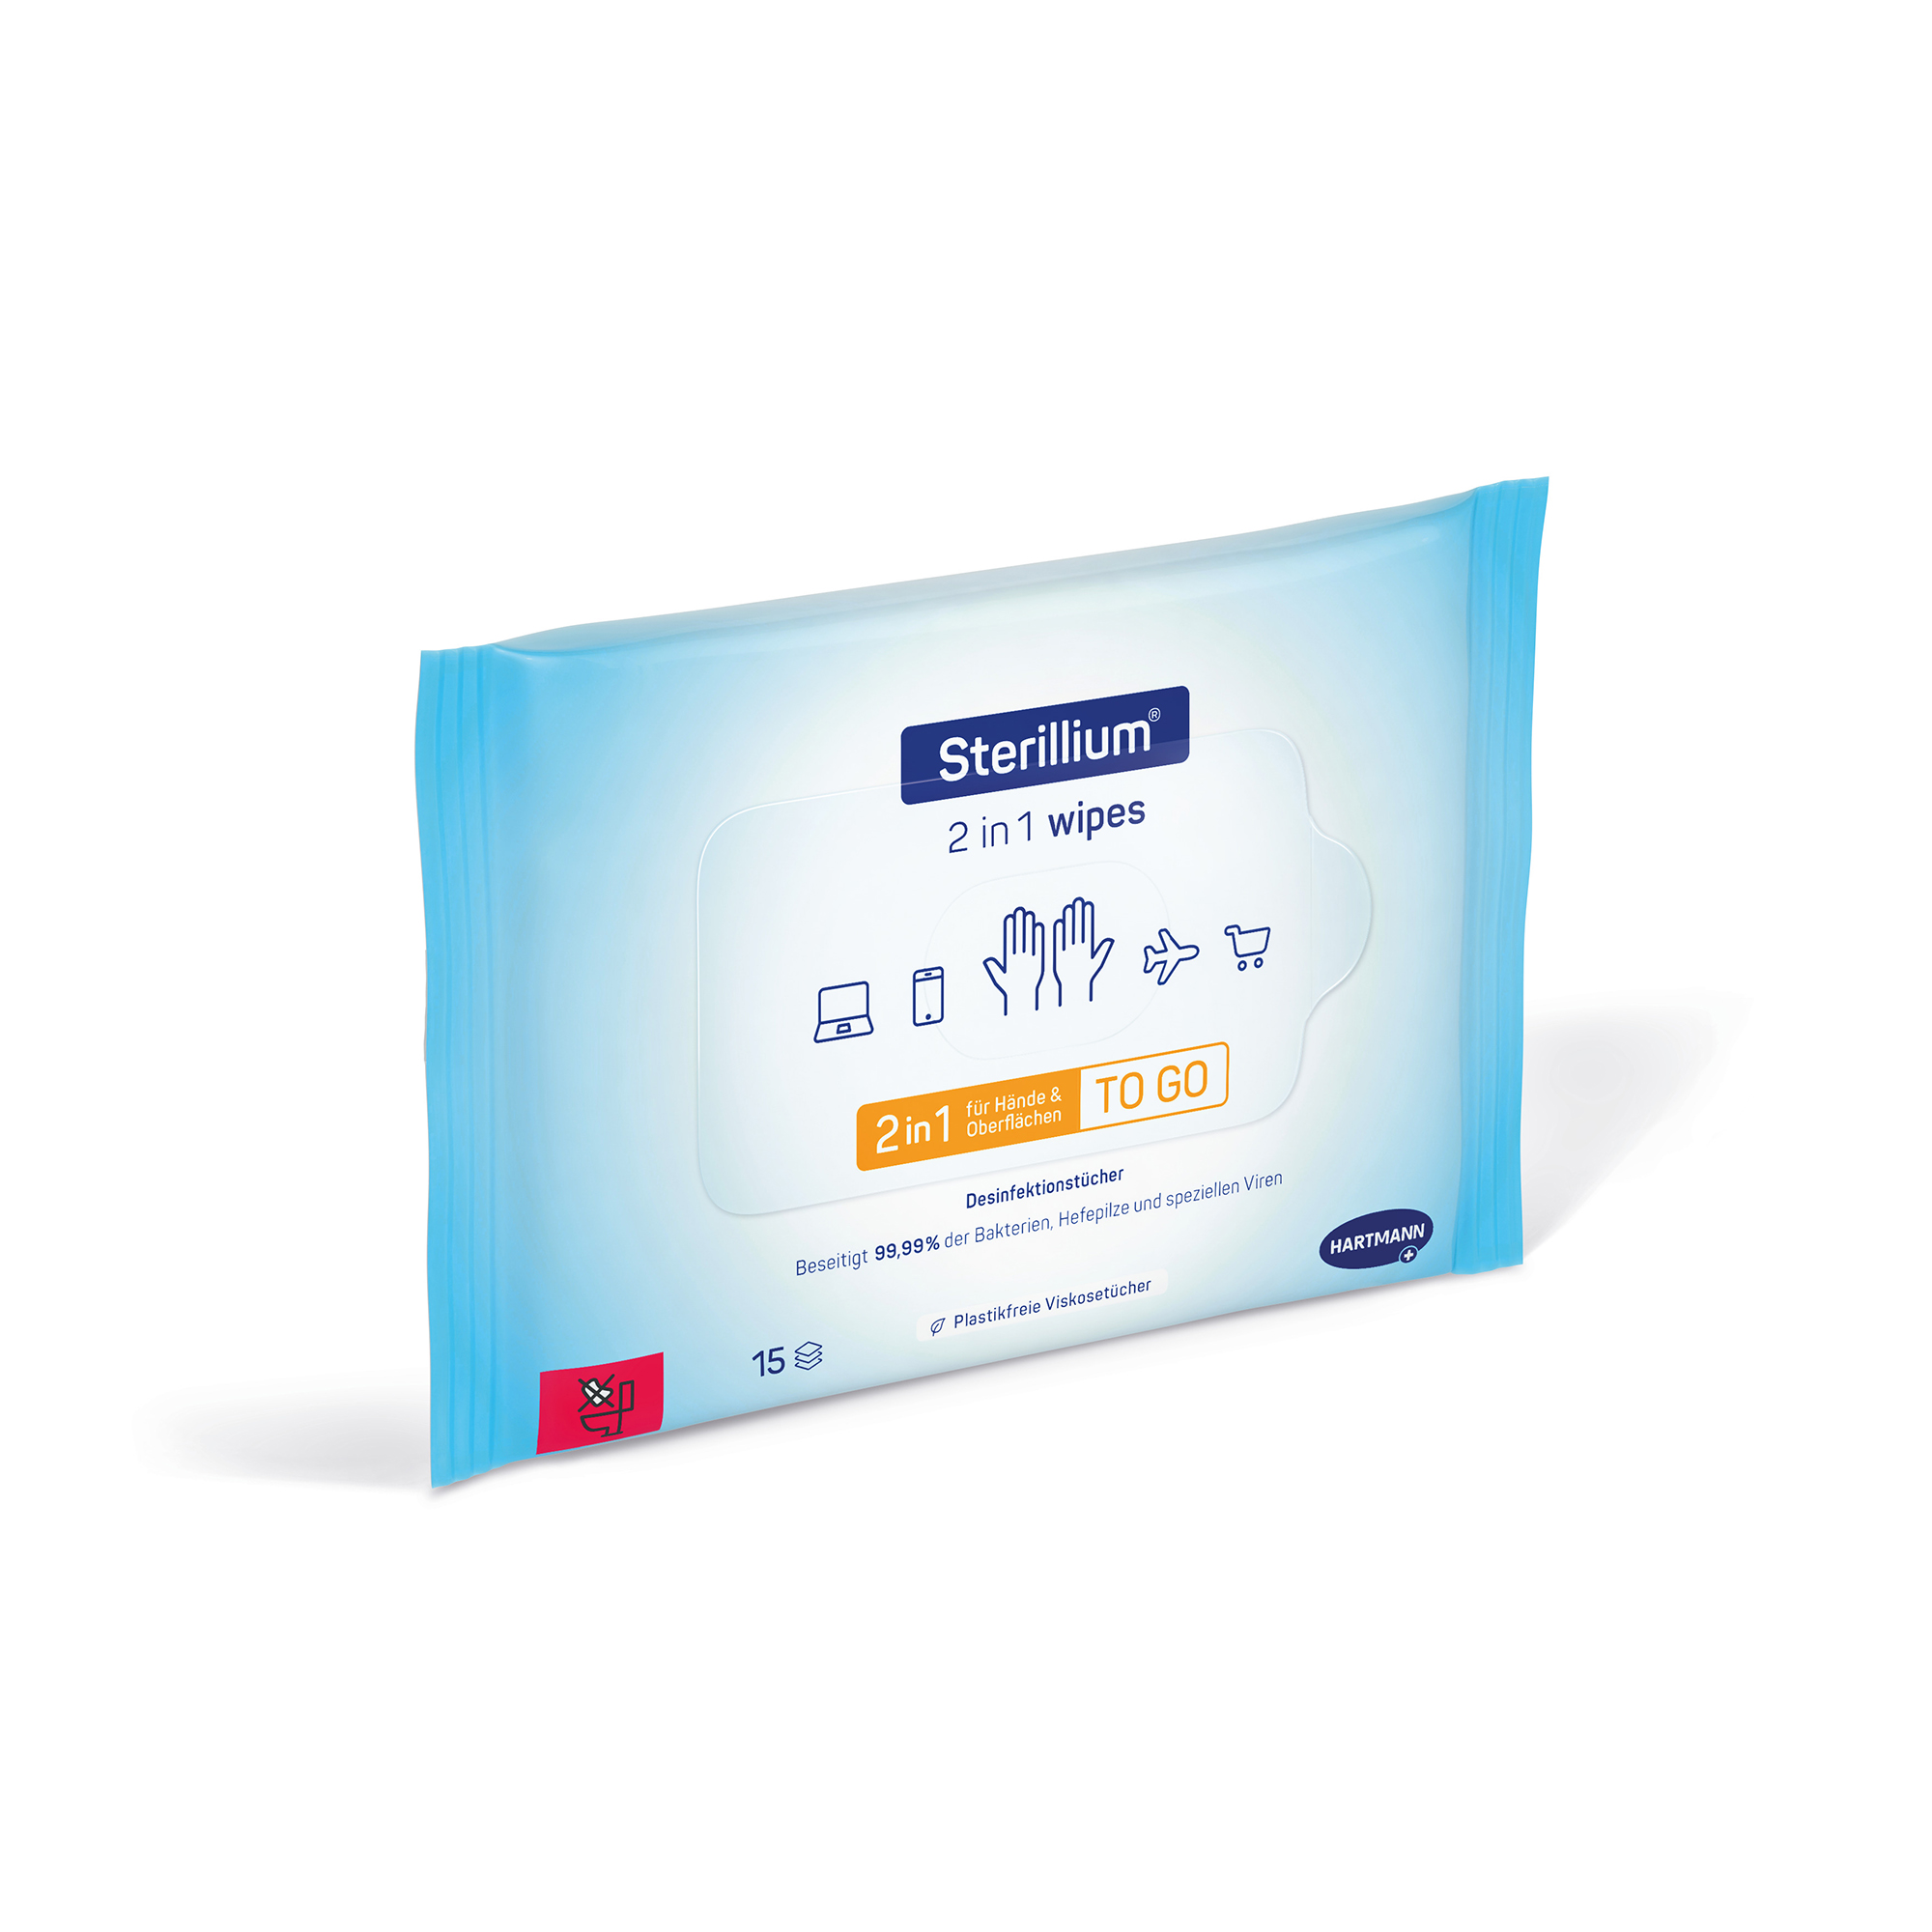 Hartmann Sterillium® 2 in 1 wipes, hand and surface disinfection wipe